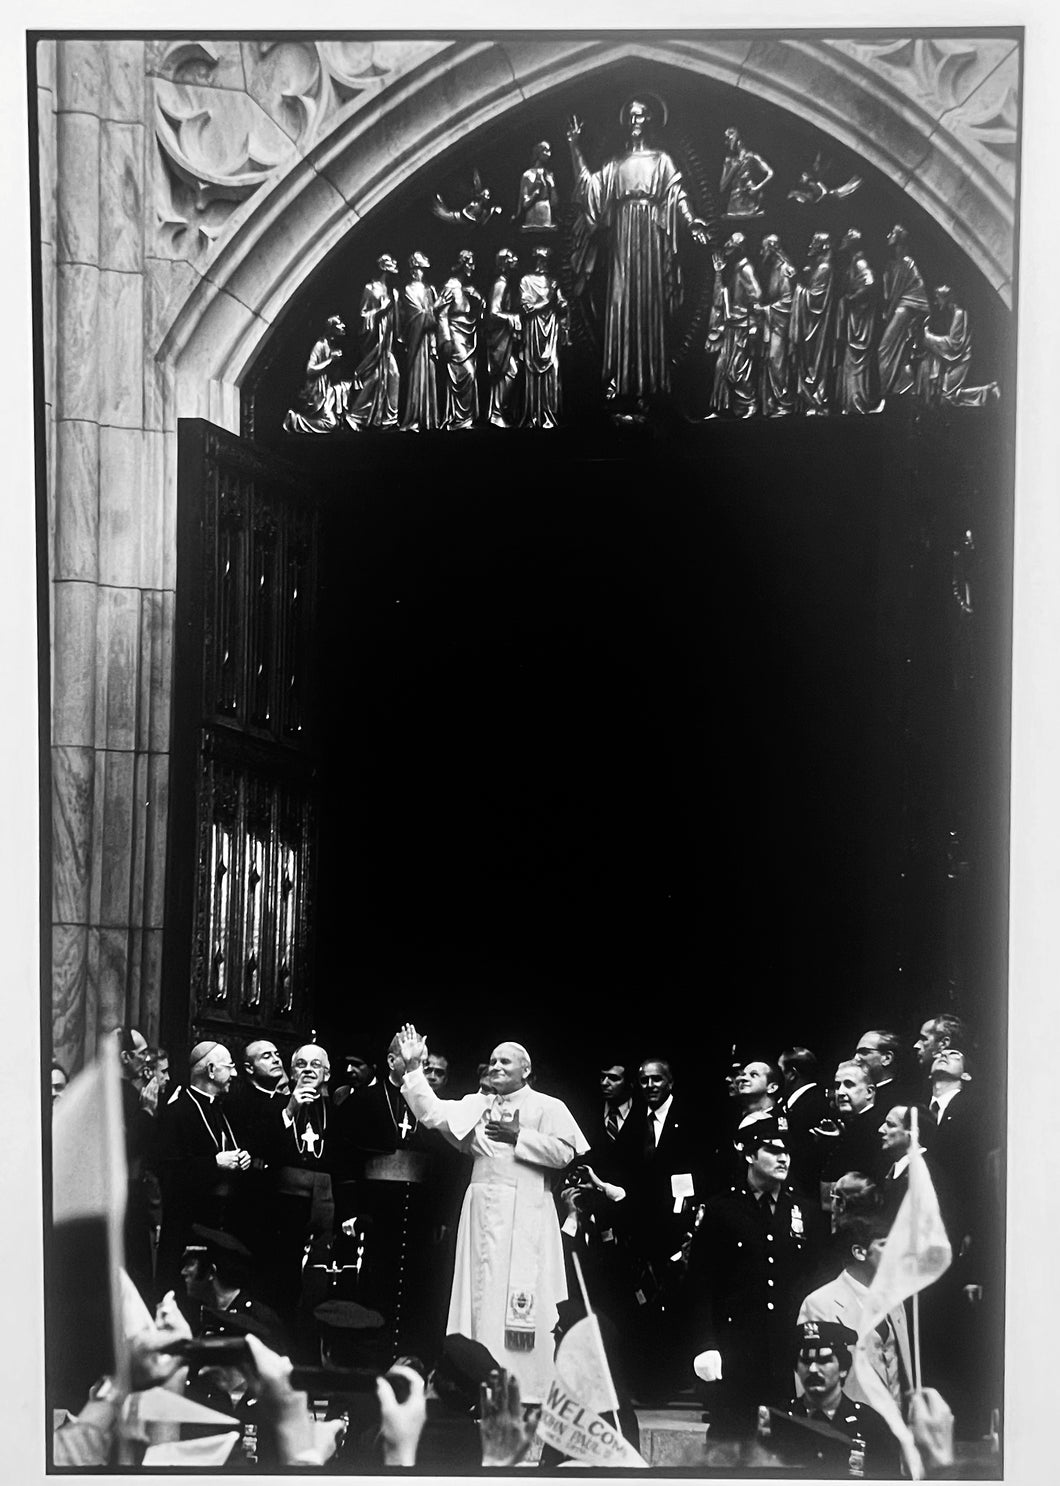 Pope John Paul II by Burt Glinn, Black-and-White Photograph at St Patrick's Cathedral New York 1970s